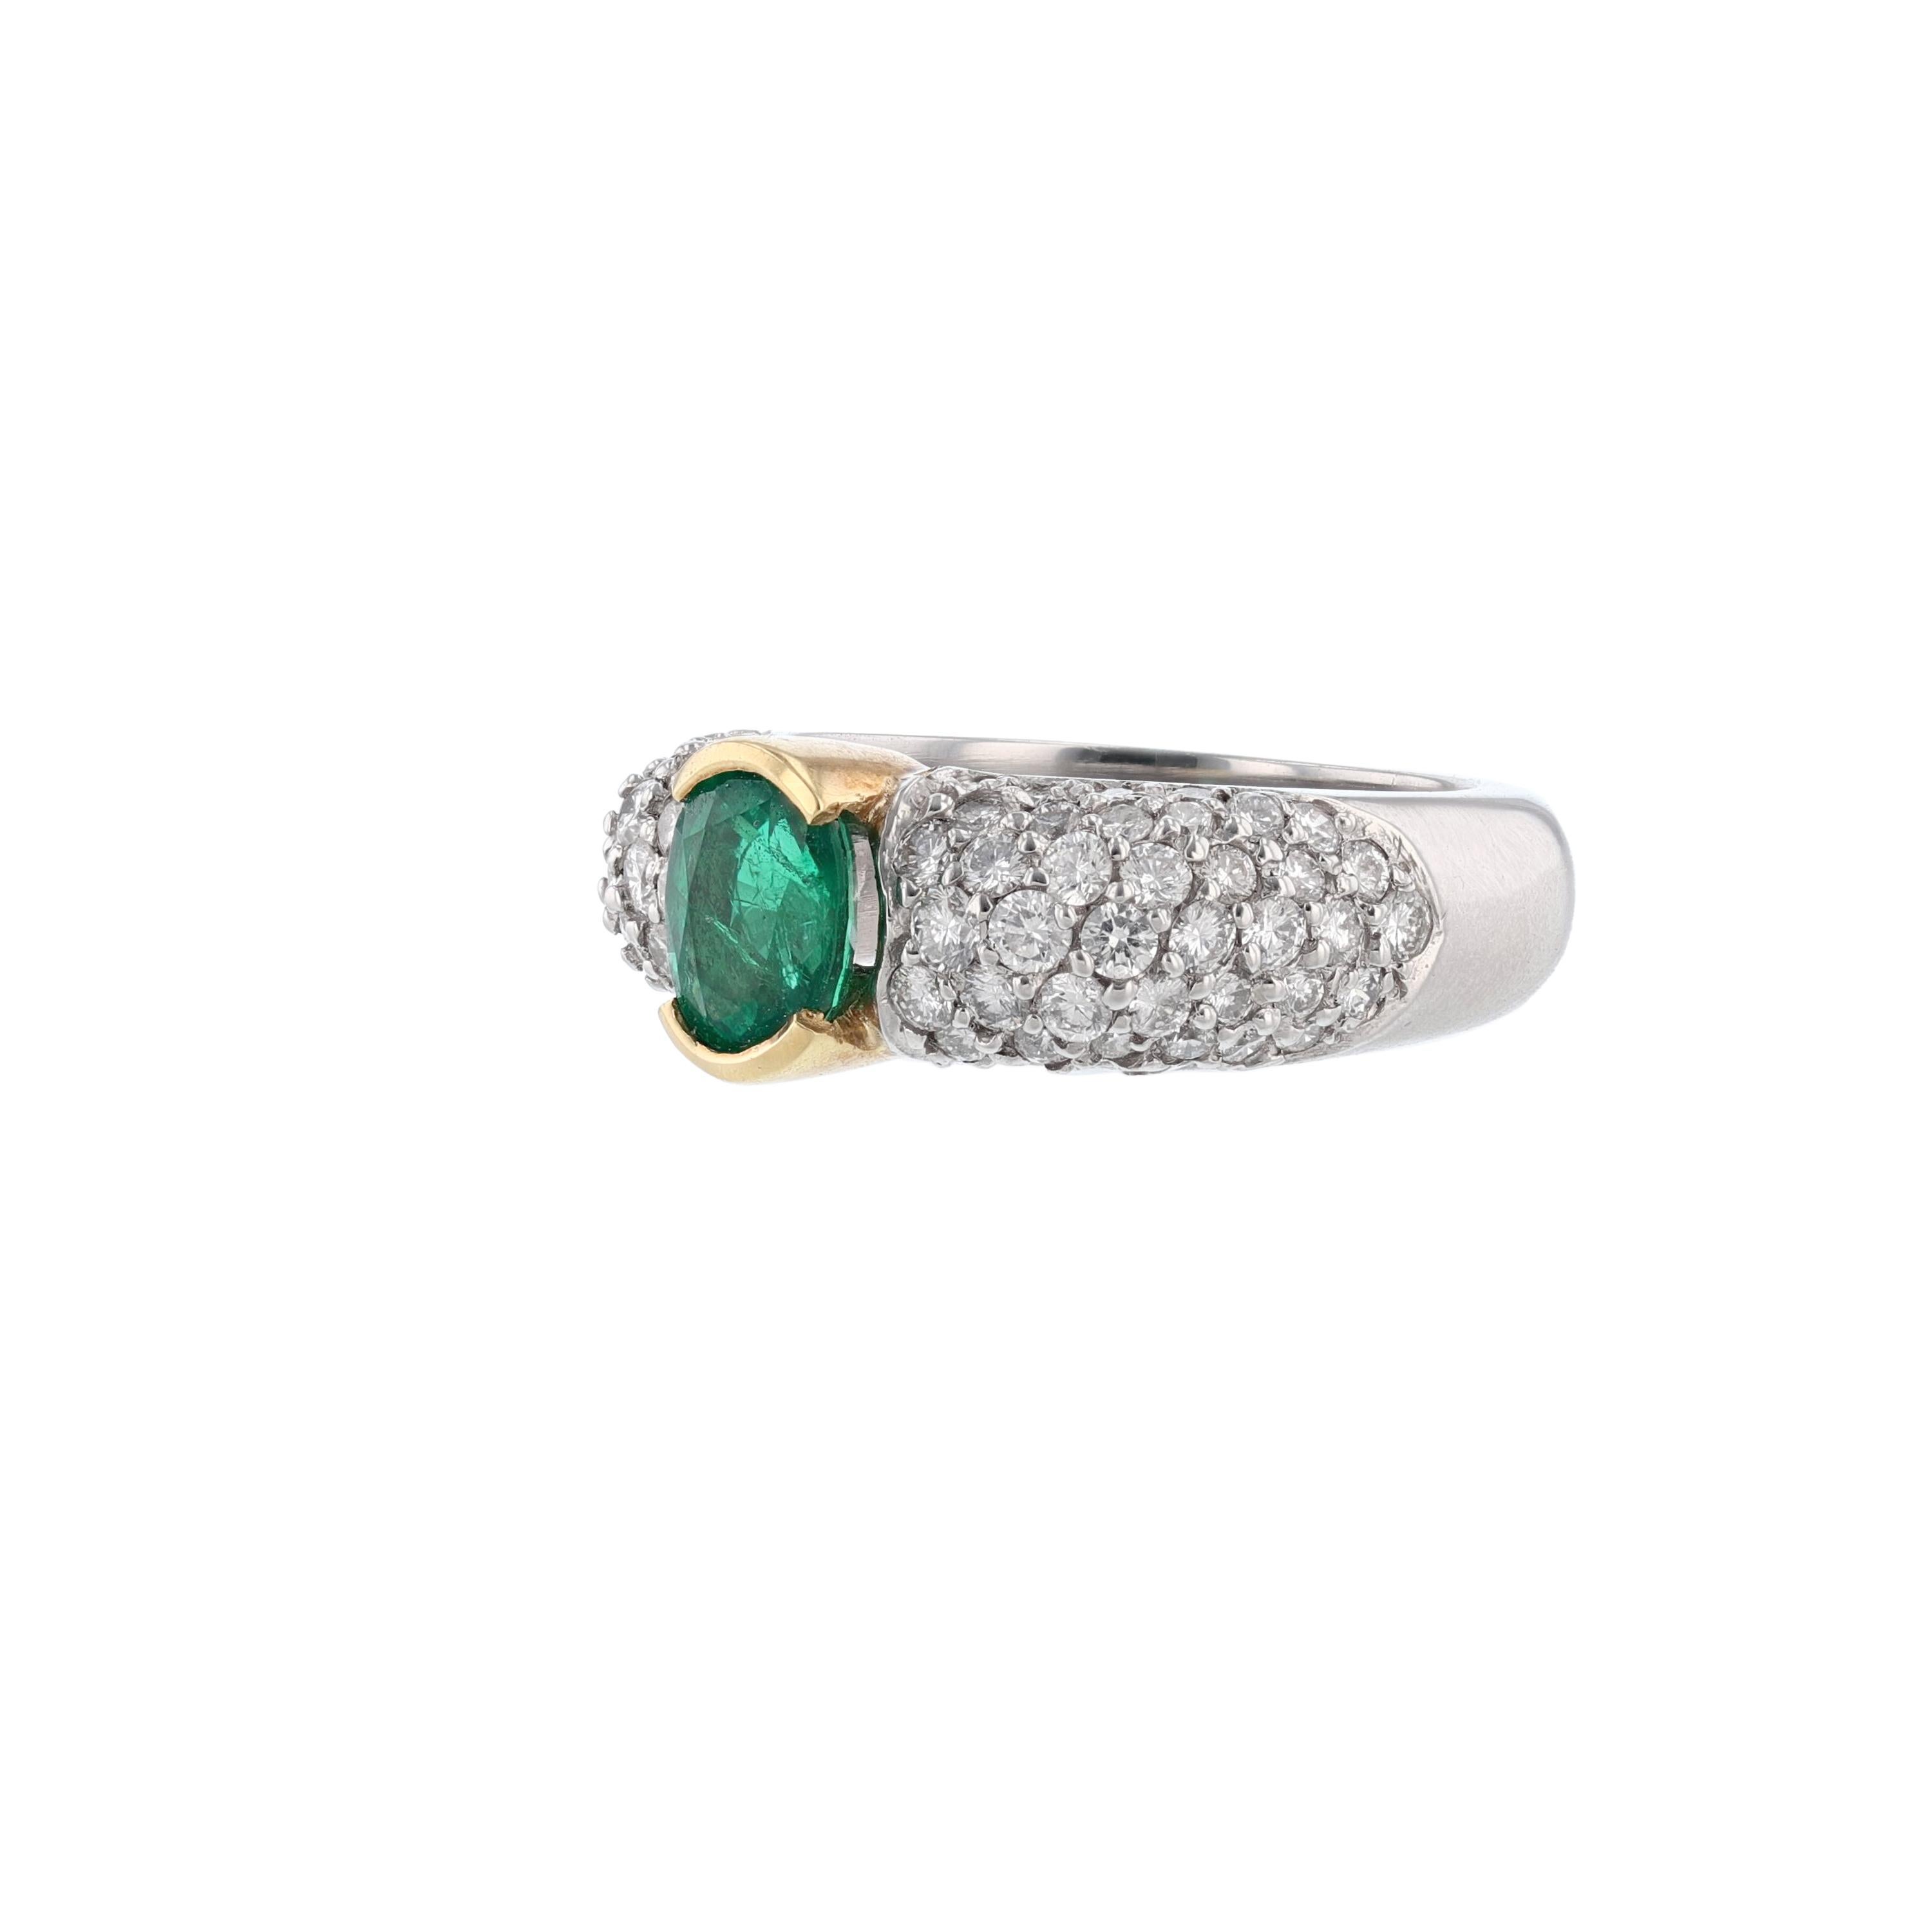 This ring is made in platinum and 18K yellow gold. It features 1 oval cut, bezel set emerald weighing 1.21 carats. It also features 81 round cut, pave’ set diamonds weighing 1.54 carats.